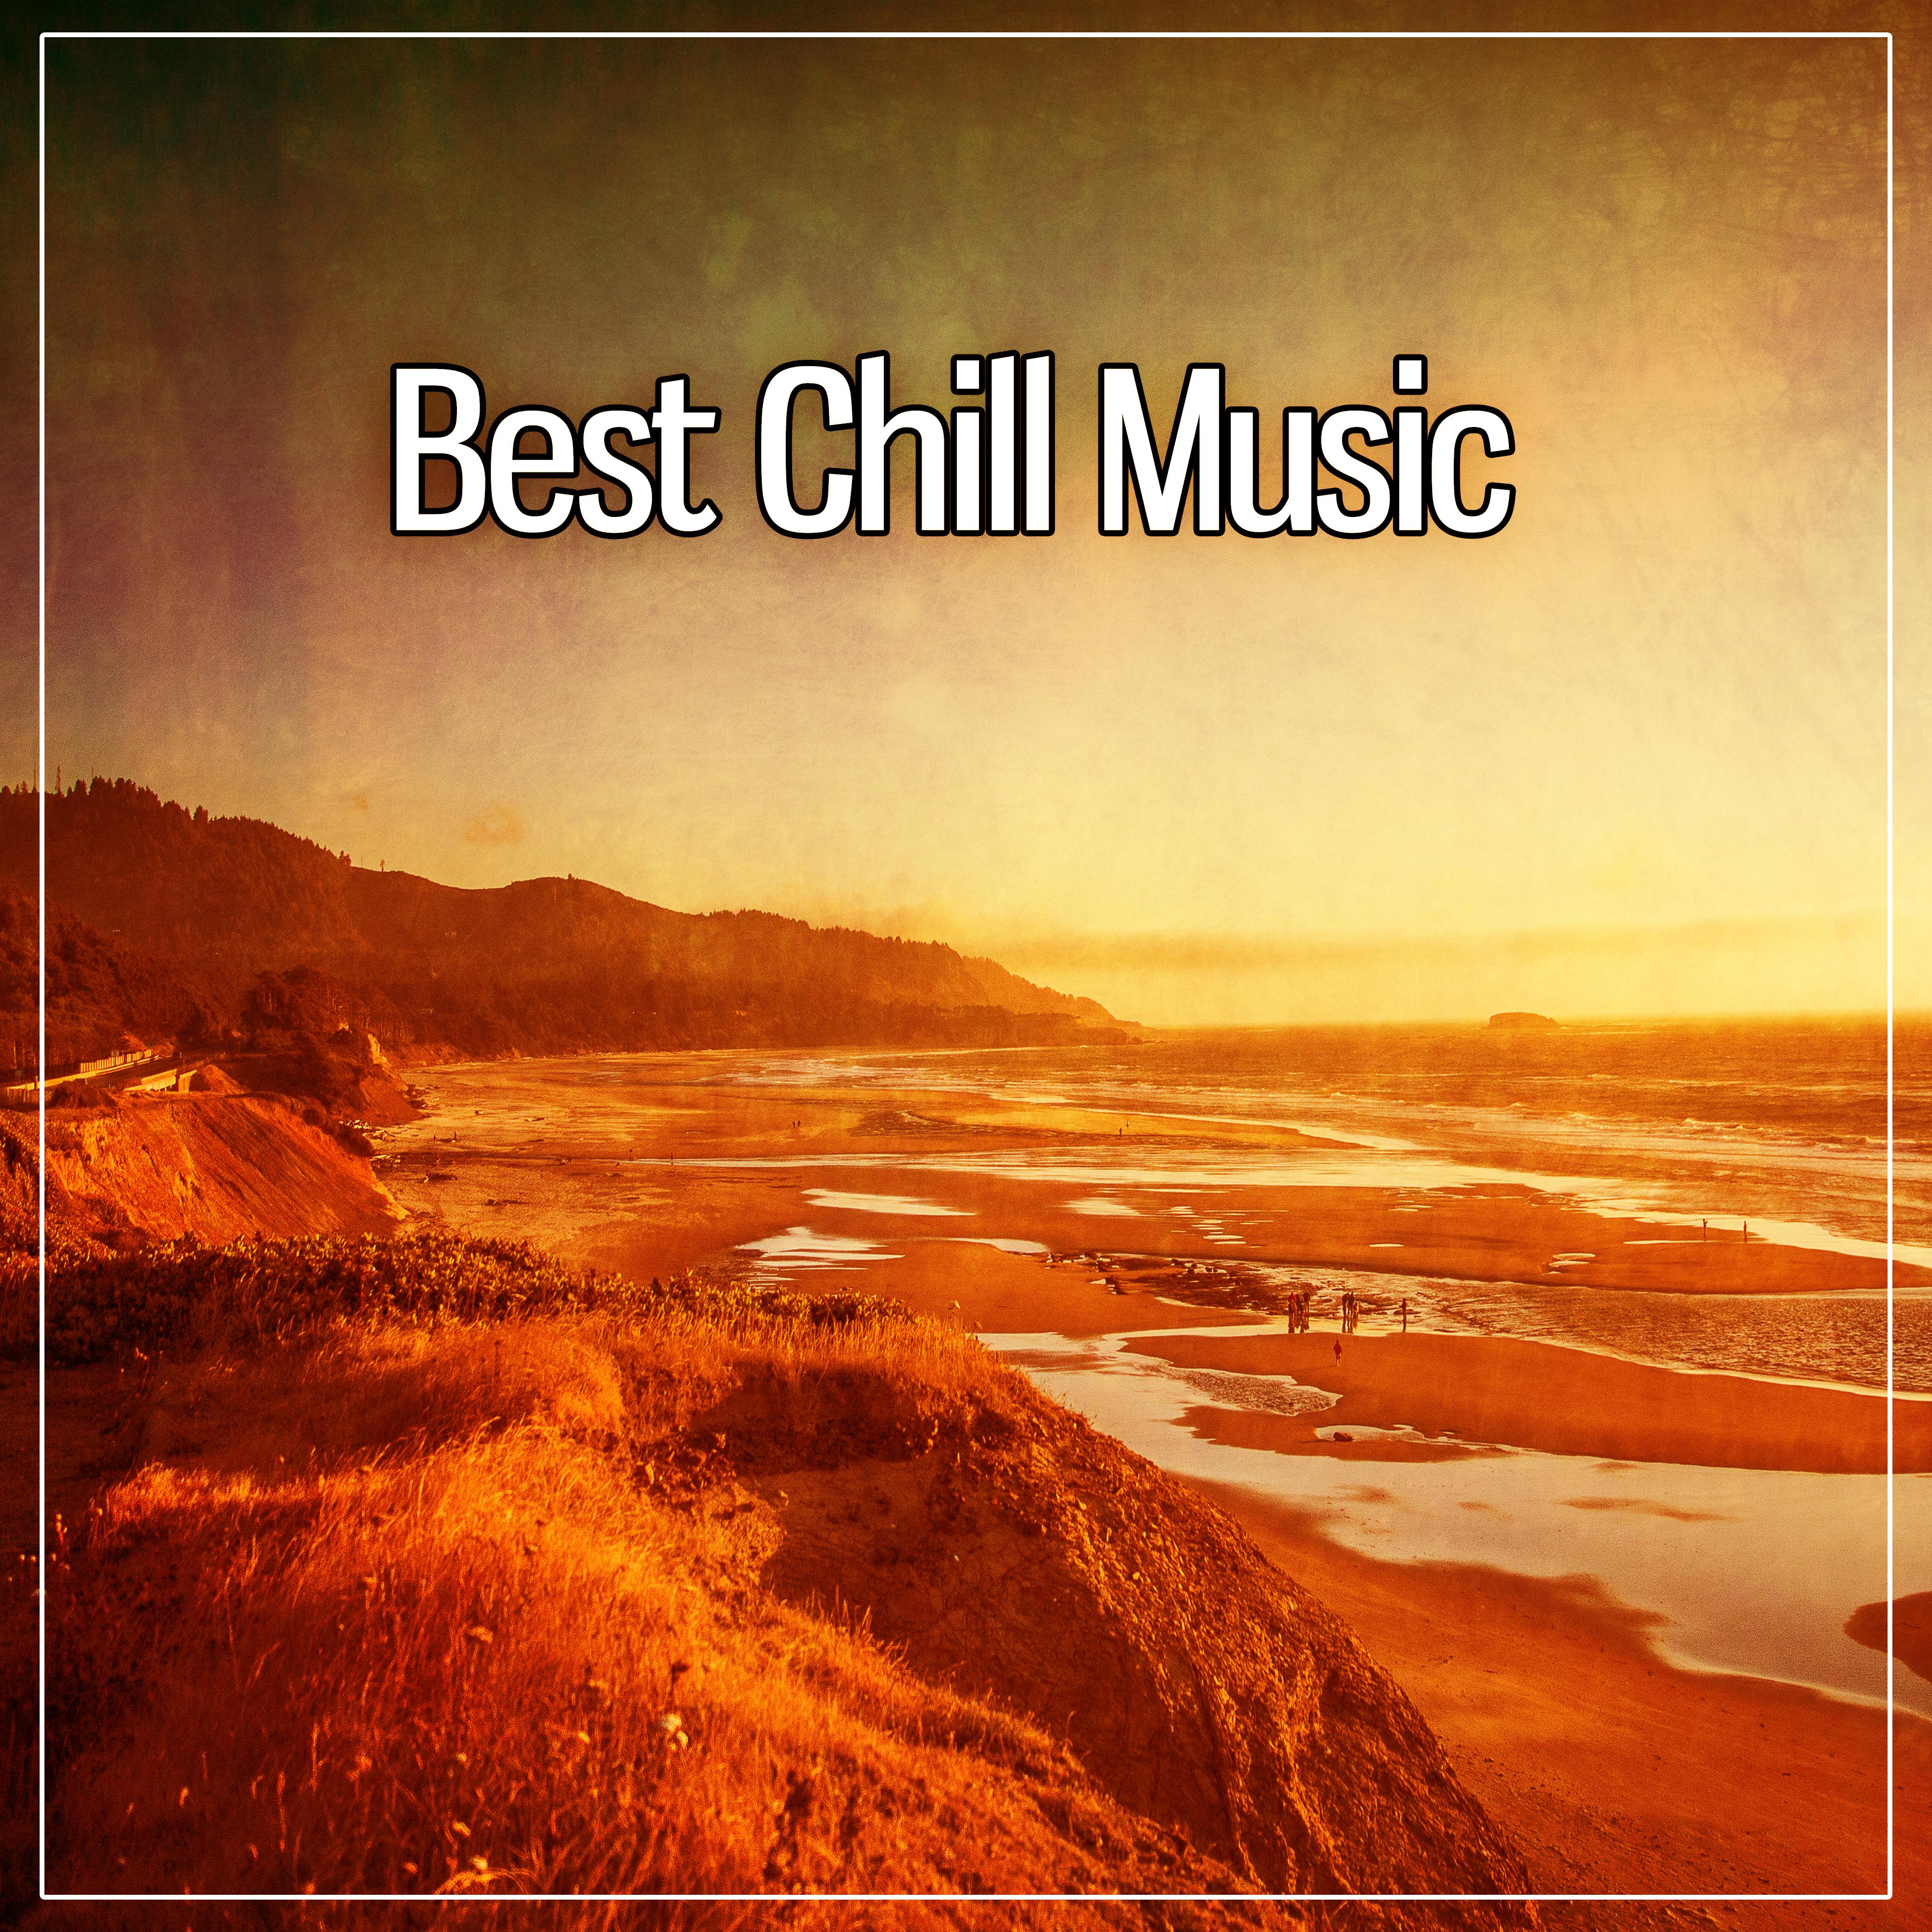 Best Chill Music – Chillout Music, Party Lounge, Chill Del Mar, Music to Relax, Soft Sounds